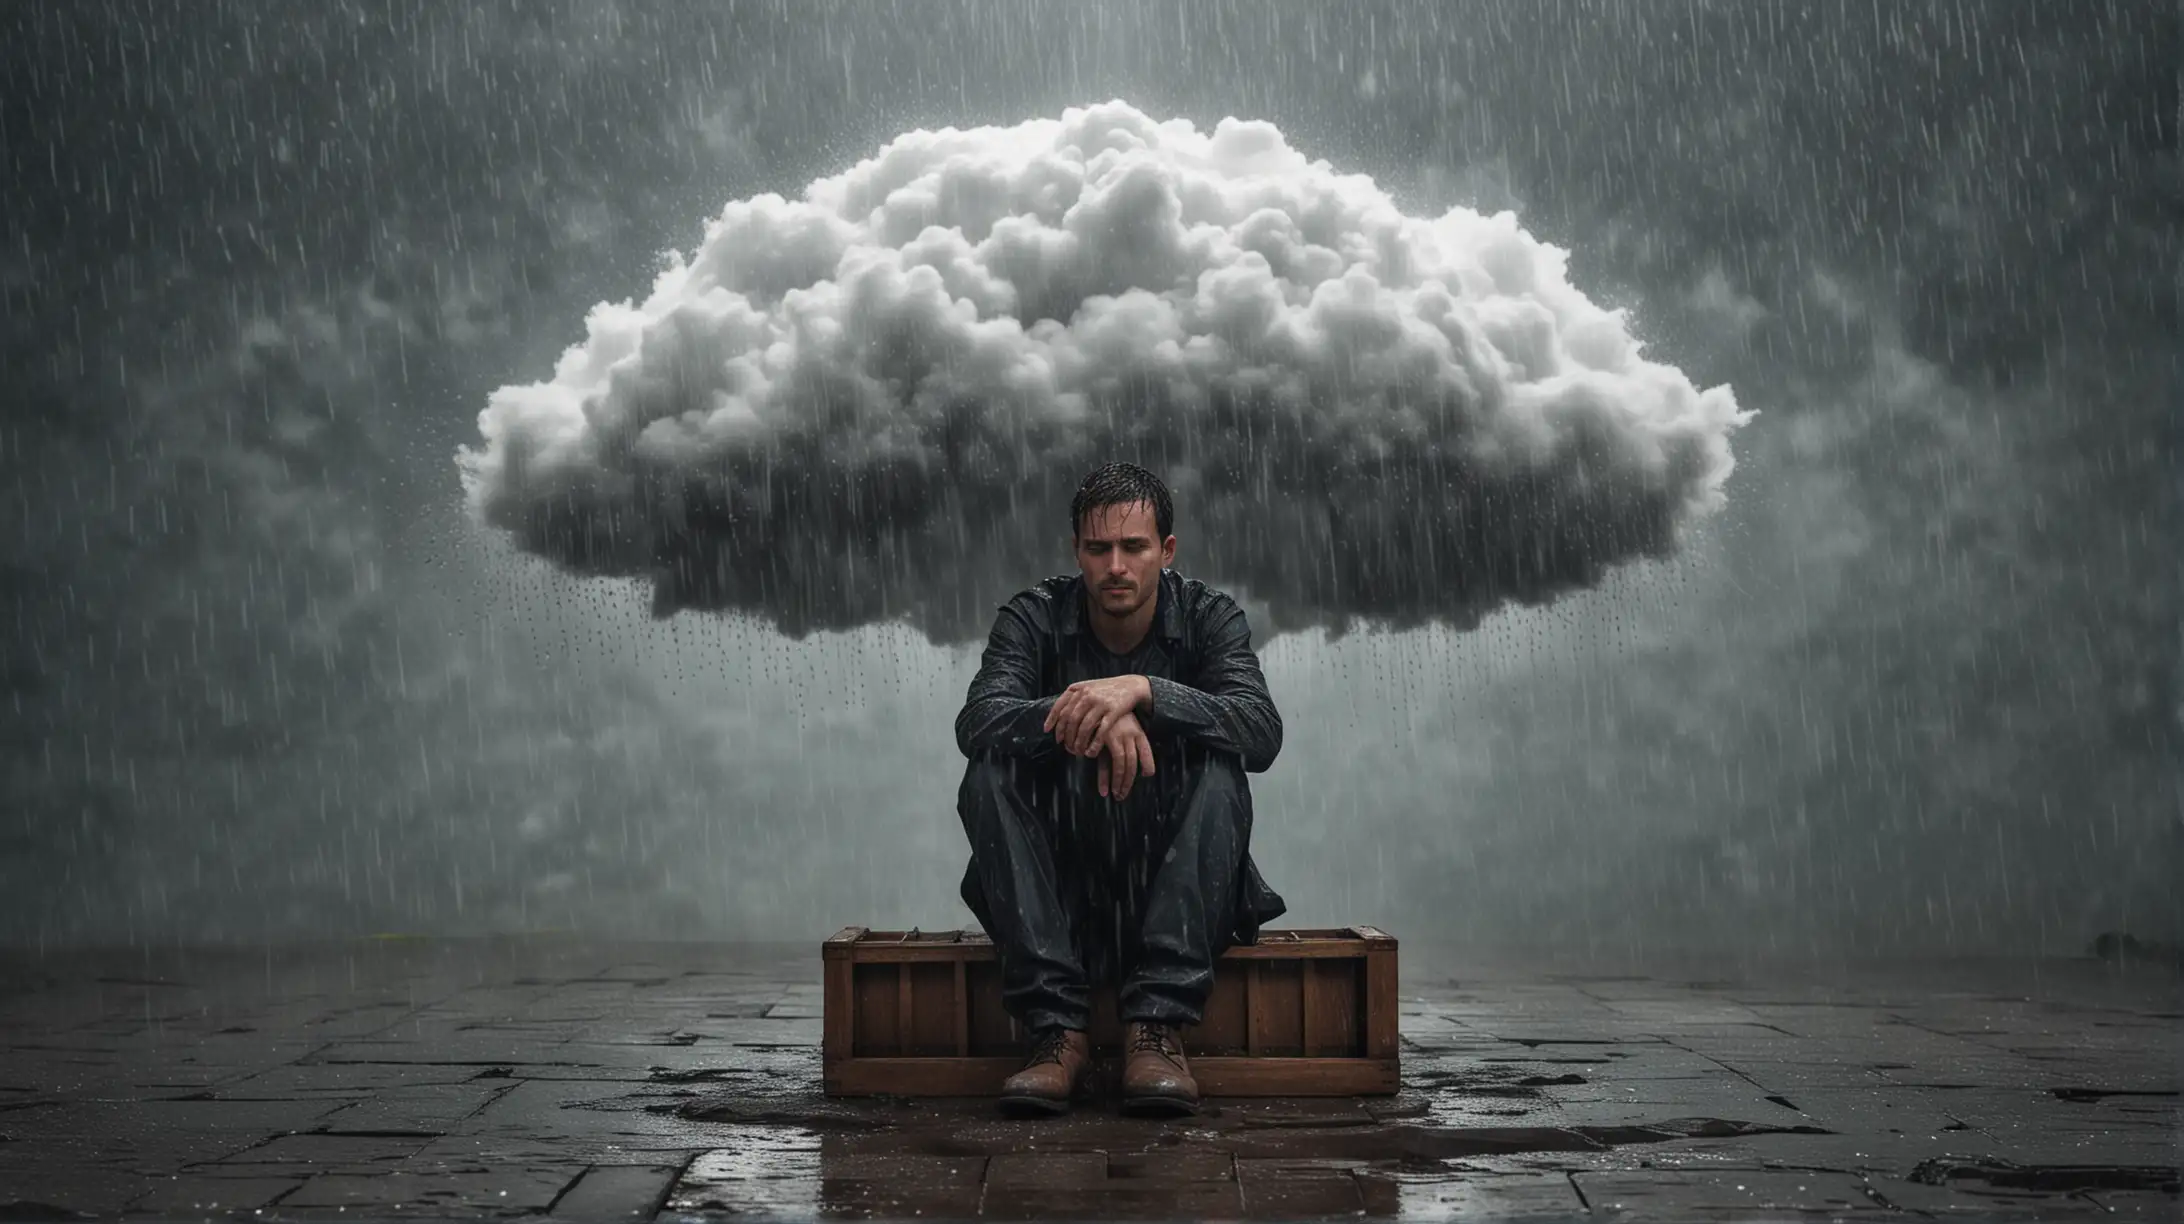 a man sits under a cloud, it is raining heavily on him, he is soaked from the rain drops
